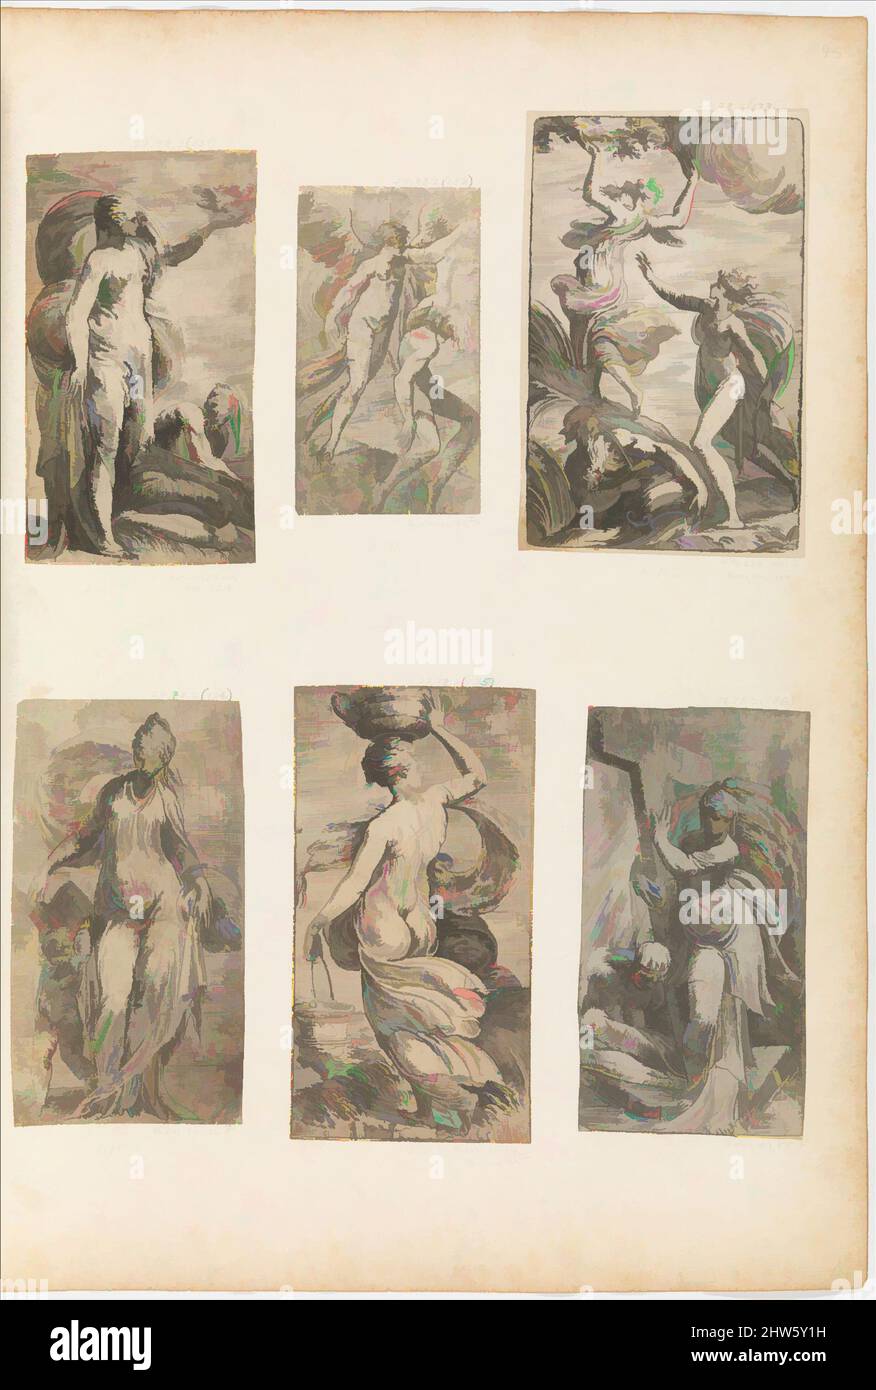 Art inspired by Christianity Triumphant over Heresy, ca. 1548–50 (?), Etching, Prints, Etched by Andrea Schiavone (Andrea Meldola) (Italian, Zadar (Zara) ca. 1510?–1563 Venice), In Mariette Album, folio 45, bottom right, Classic works modernized by Artotop with a splash of modernity. Shapes, color and value, eye-catching visual impact on art. Emotions through freedom of artworks in a contemporary way. A timeless message pursuing a wildly creative new direction. Artists turning to the digital medium and creating the Artotop NFT Stock Photo